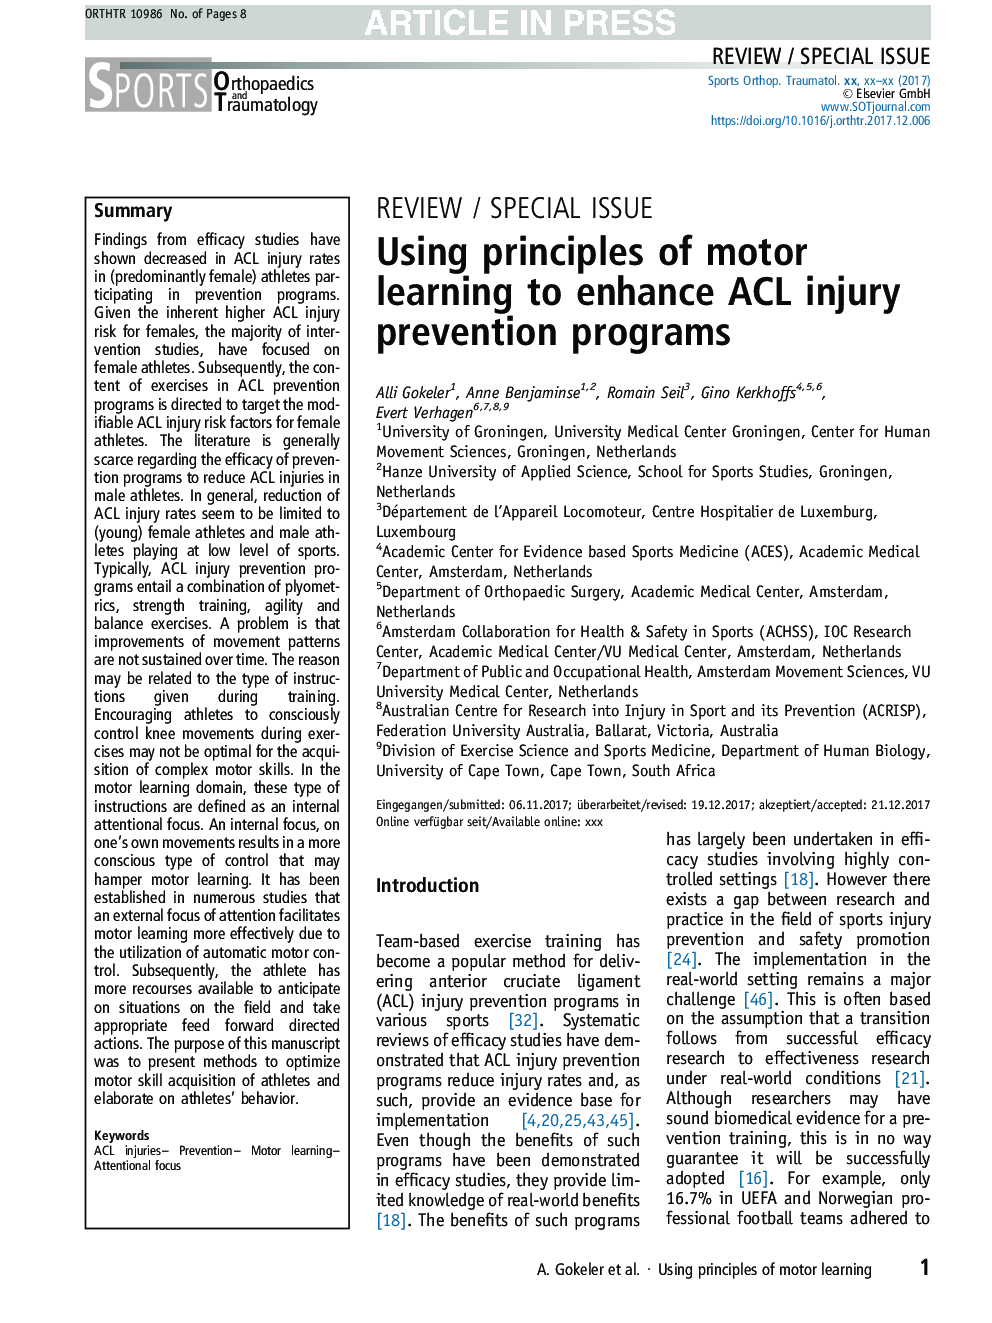 Using principles of motor learning to enhance ACL injury prevention programs